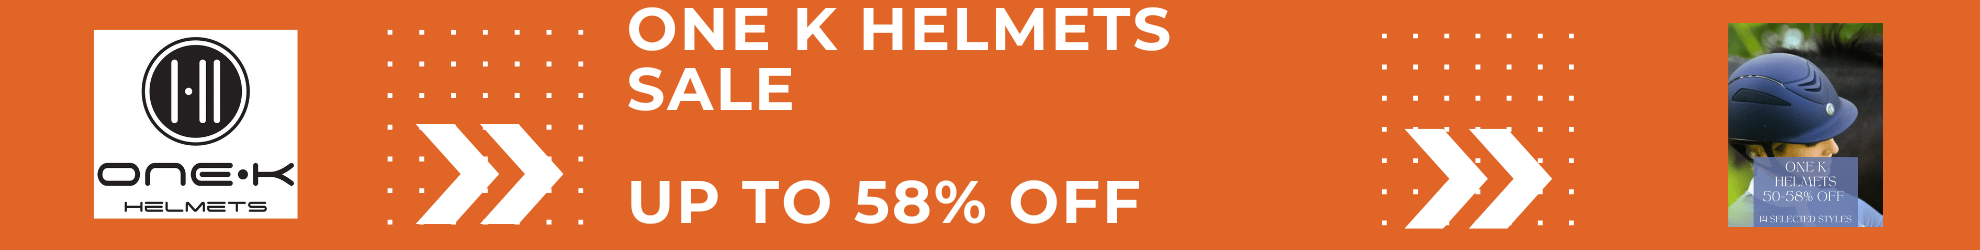 One K Helmets - Up to 58% Off